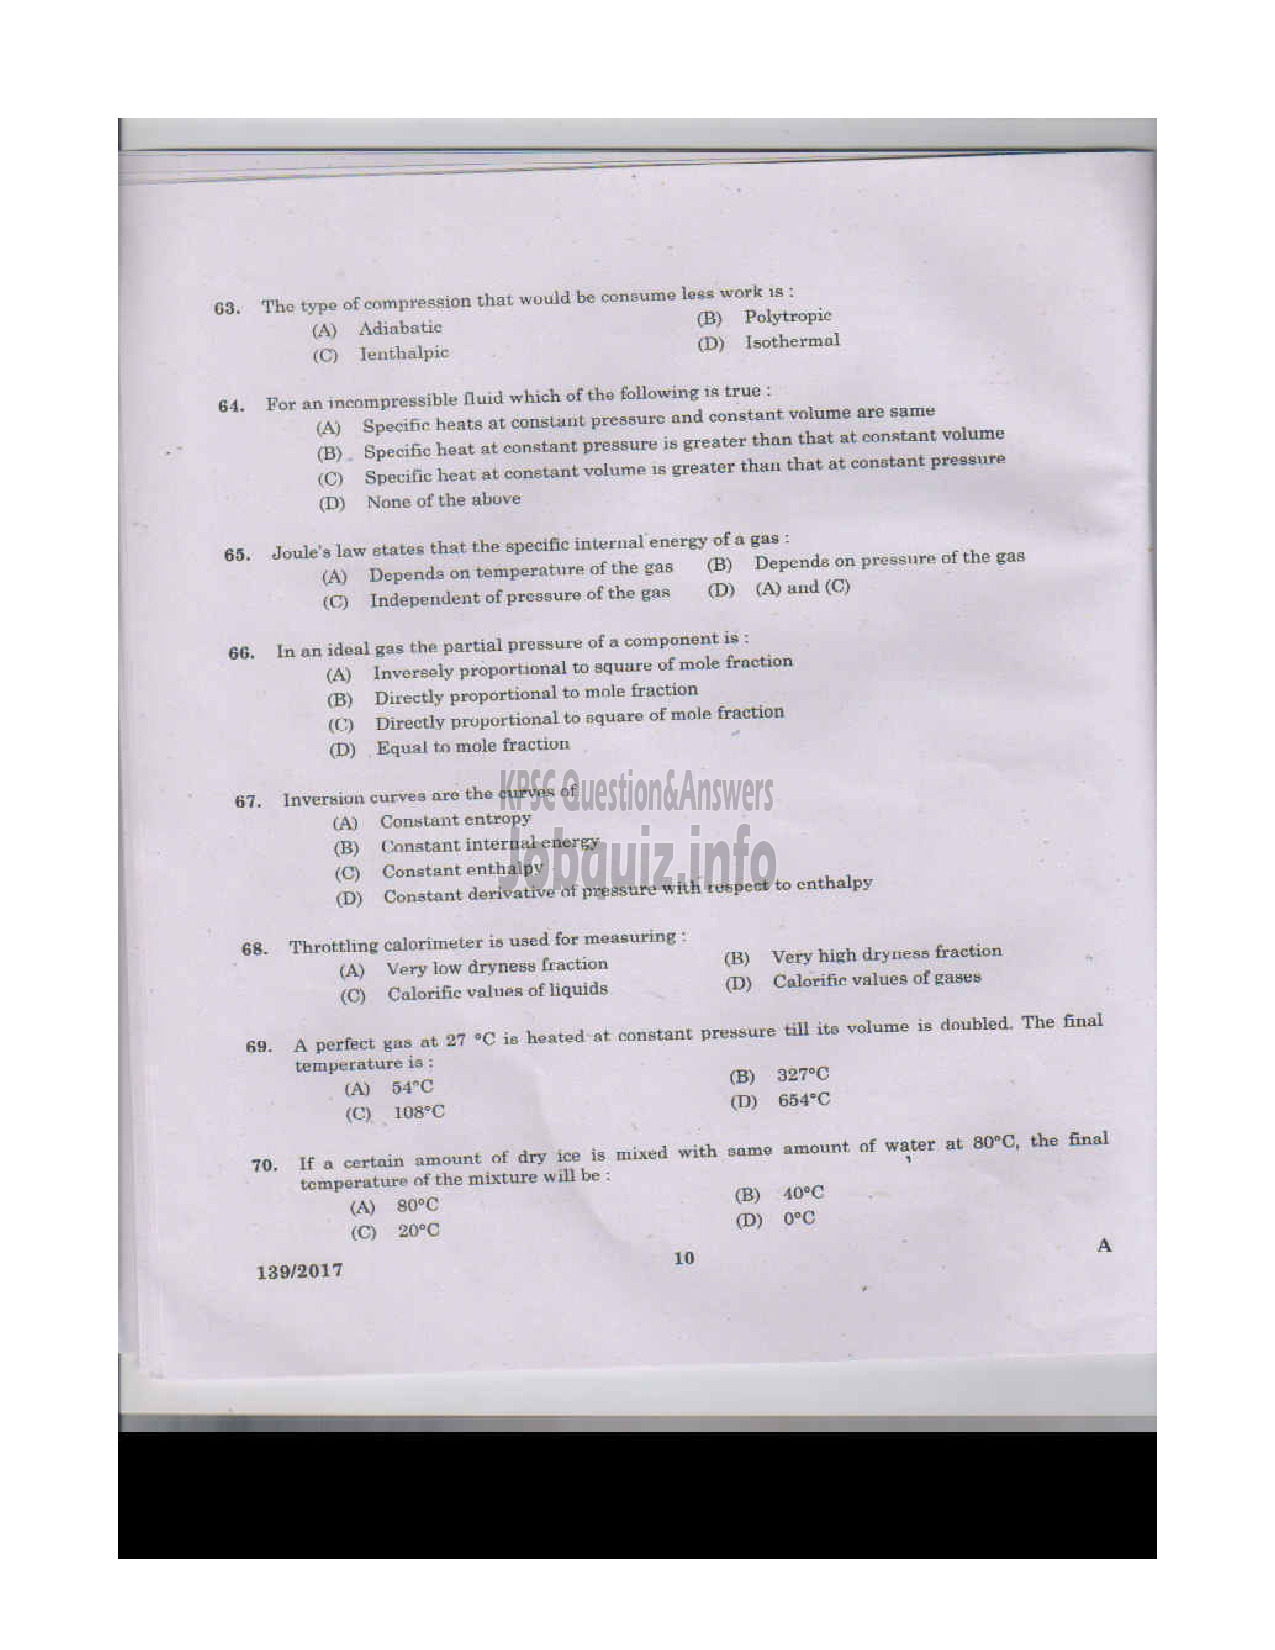 Kerala PSC Question Paper - ASSISTANT ENGINEER GROUND WATER DEPARTMENT-9